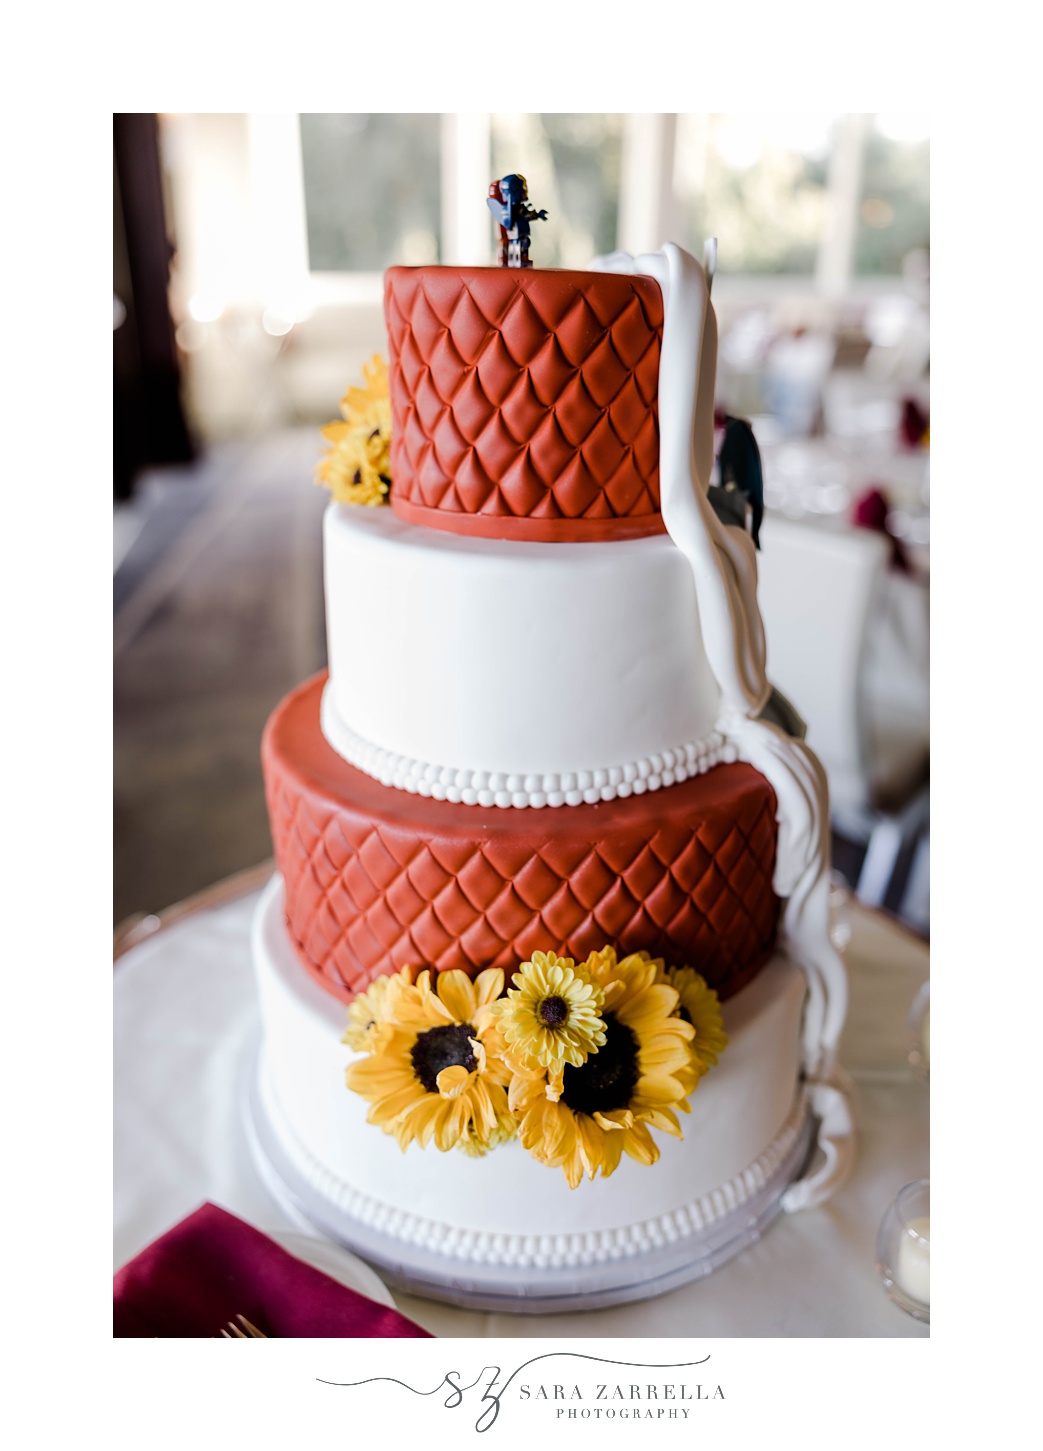 front of wedding cake with sunflower accents 